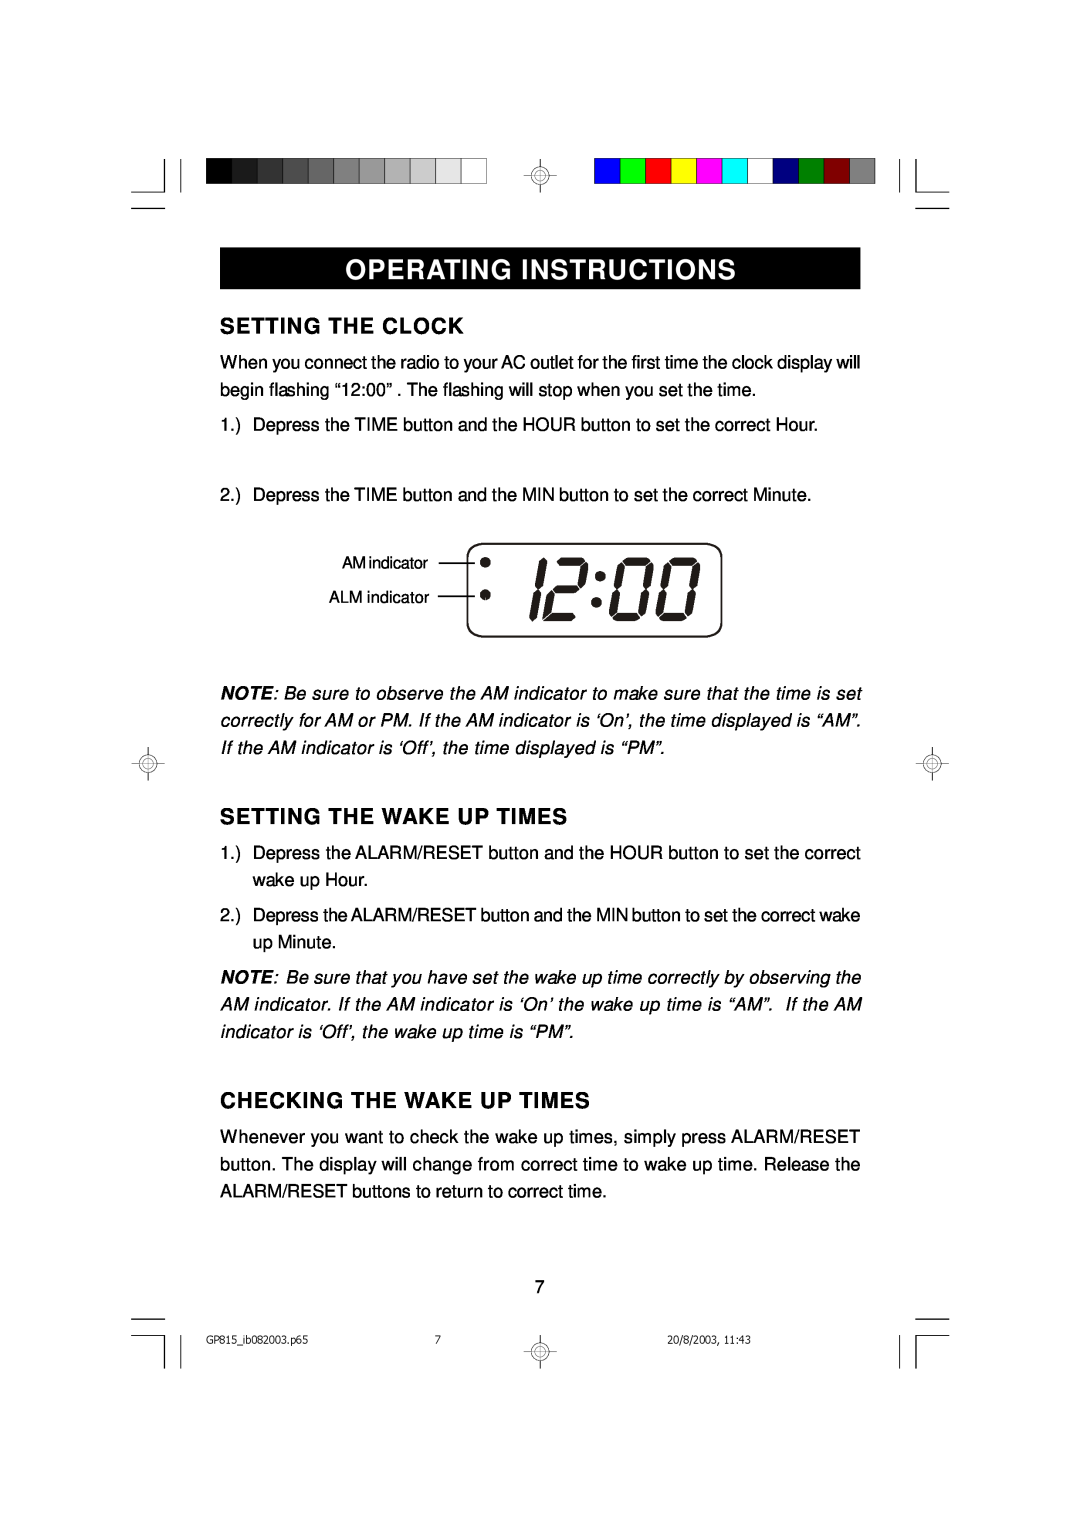 Emerson GP815 owner manual Operating Instructions, Setting The Clock, Setting The Wake Up Times, Checking The Wake Up Times 